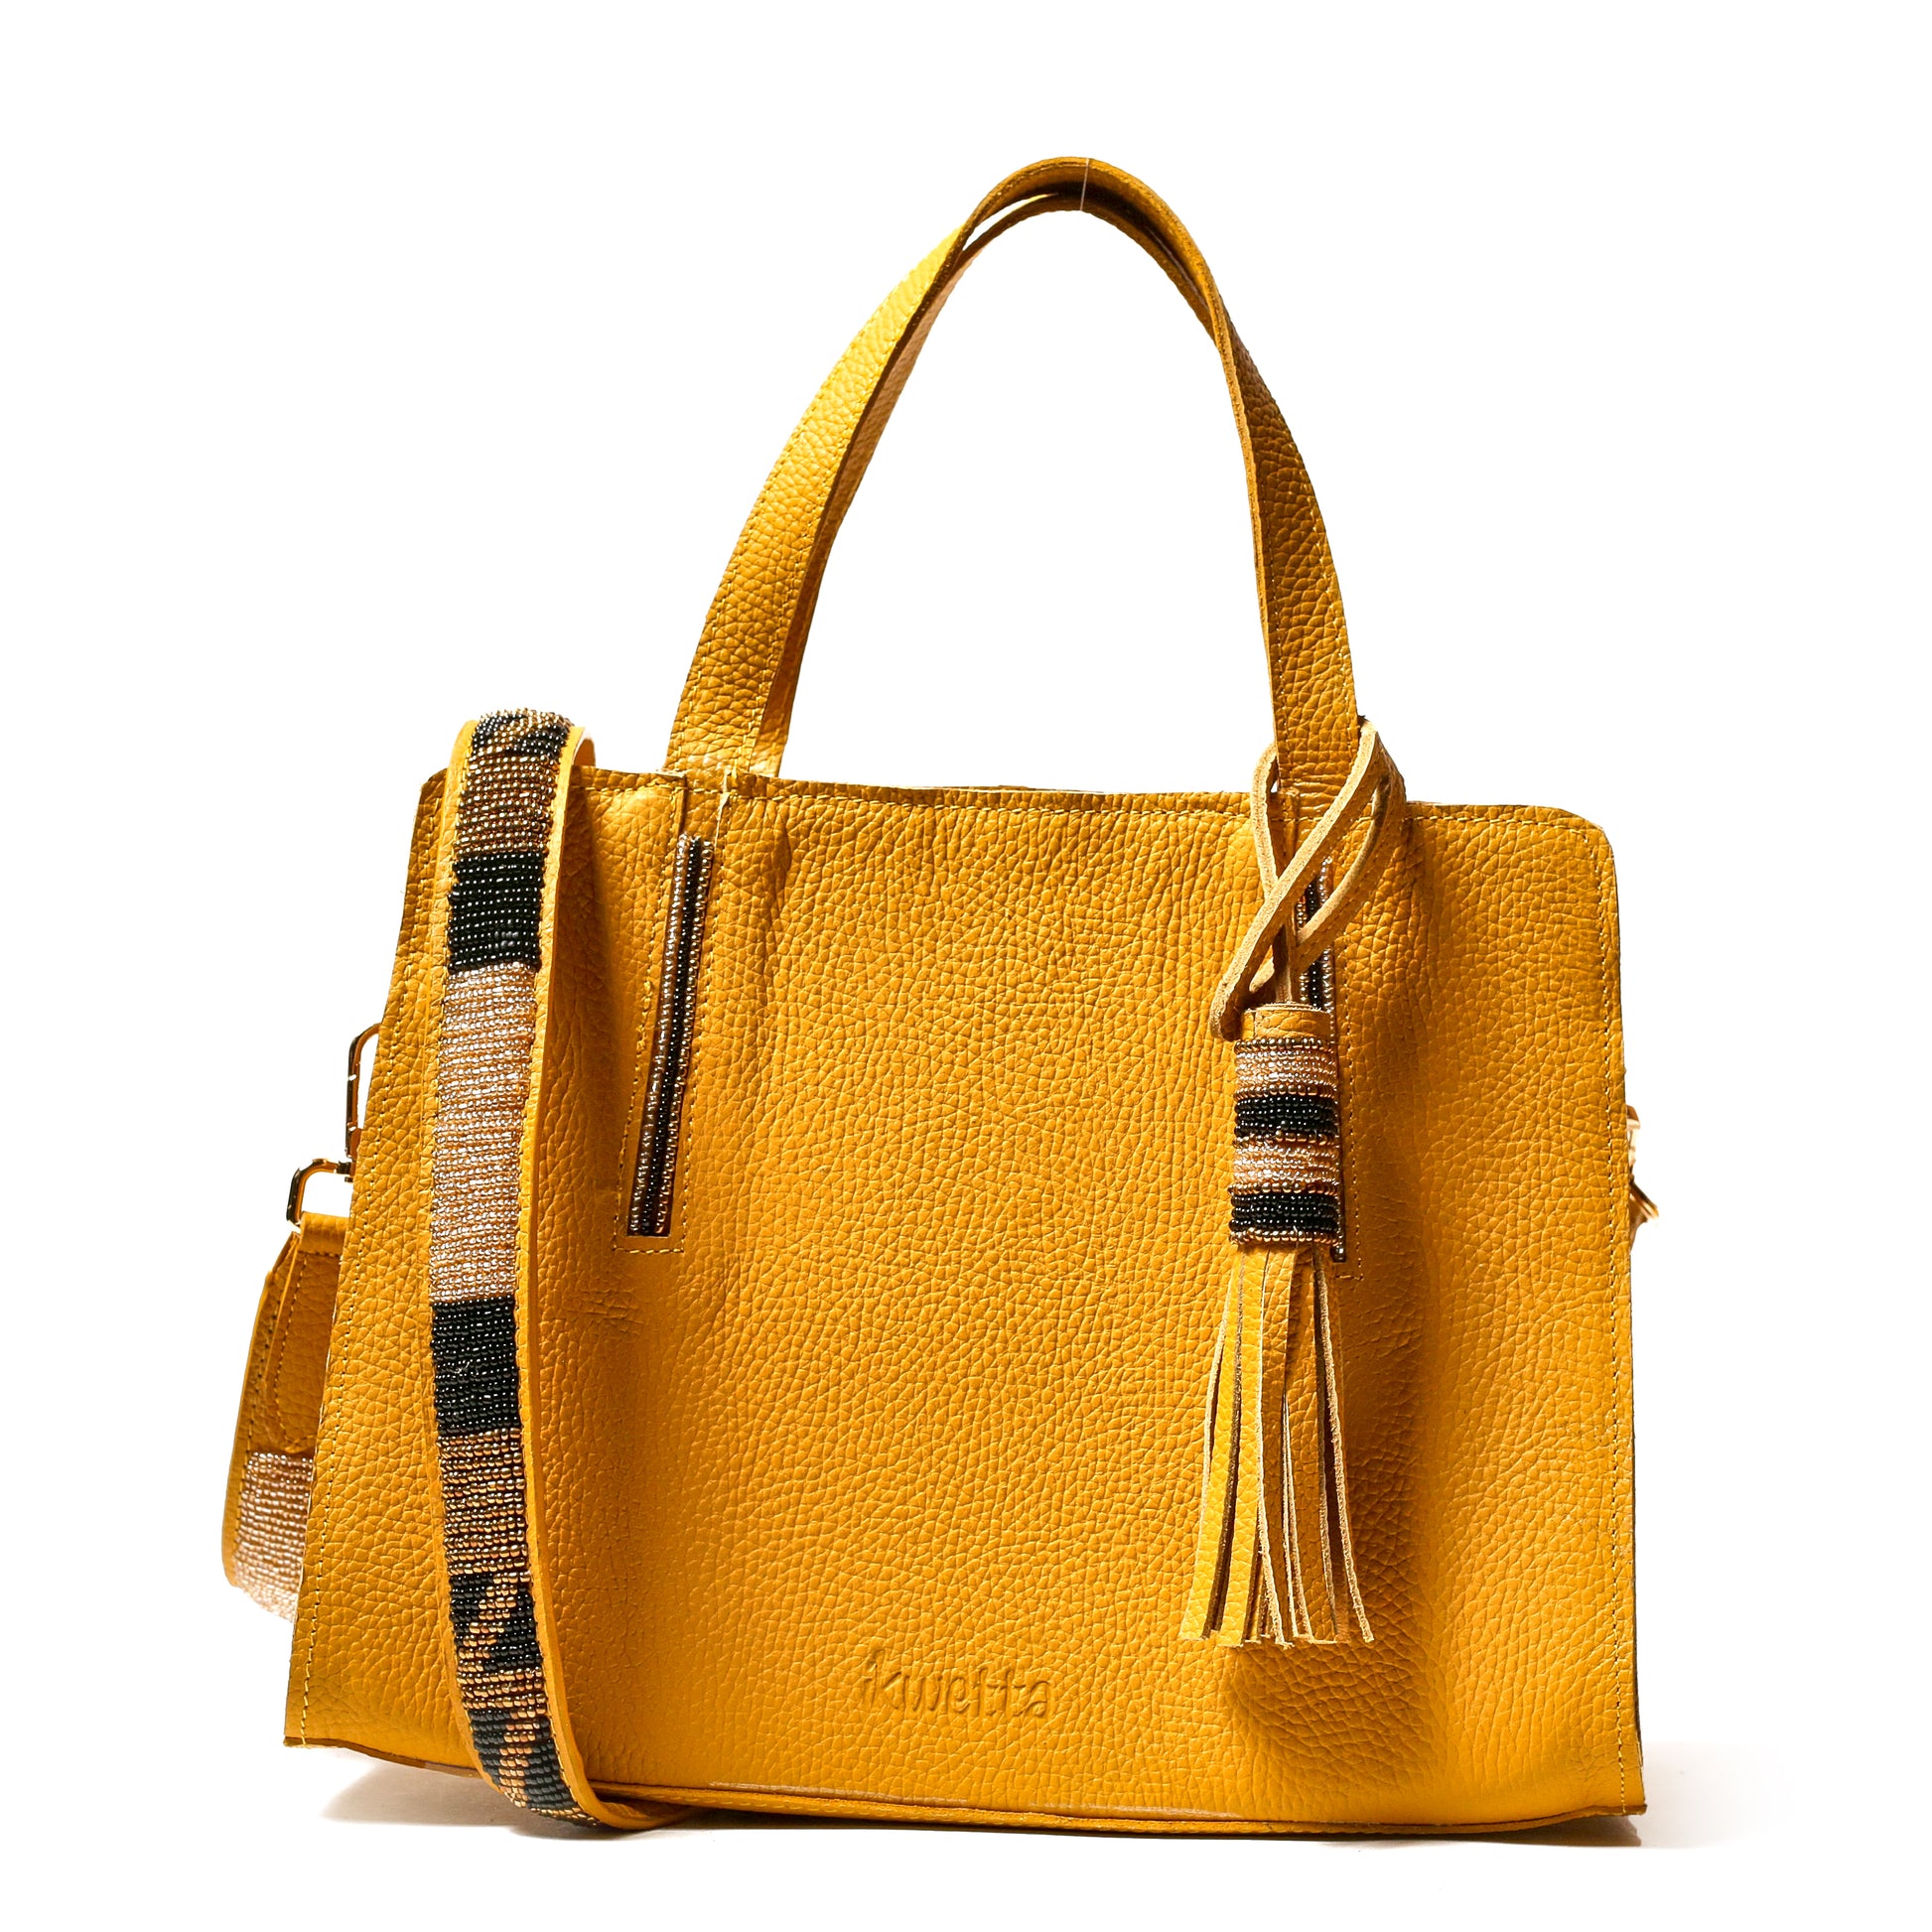 Kate bag in Golden yellow milled leather and with Maasai beaded strap.